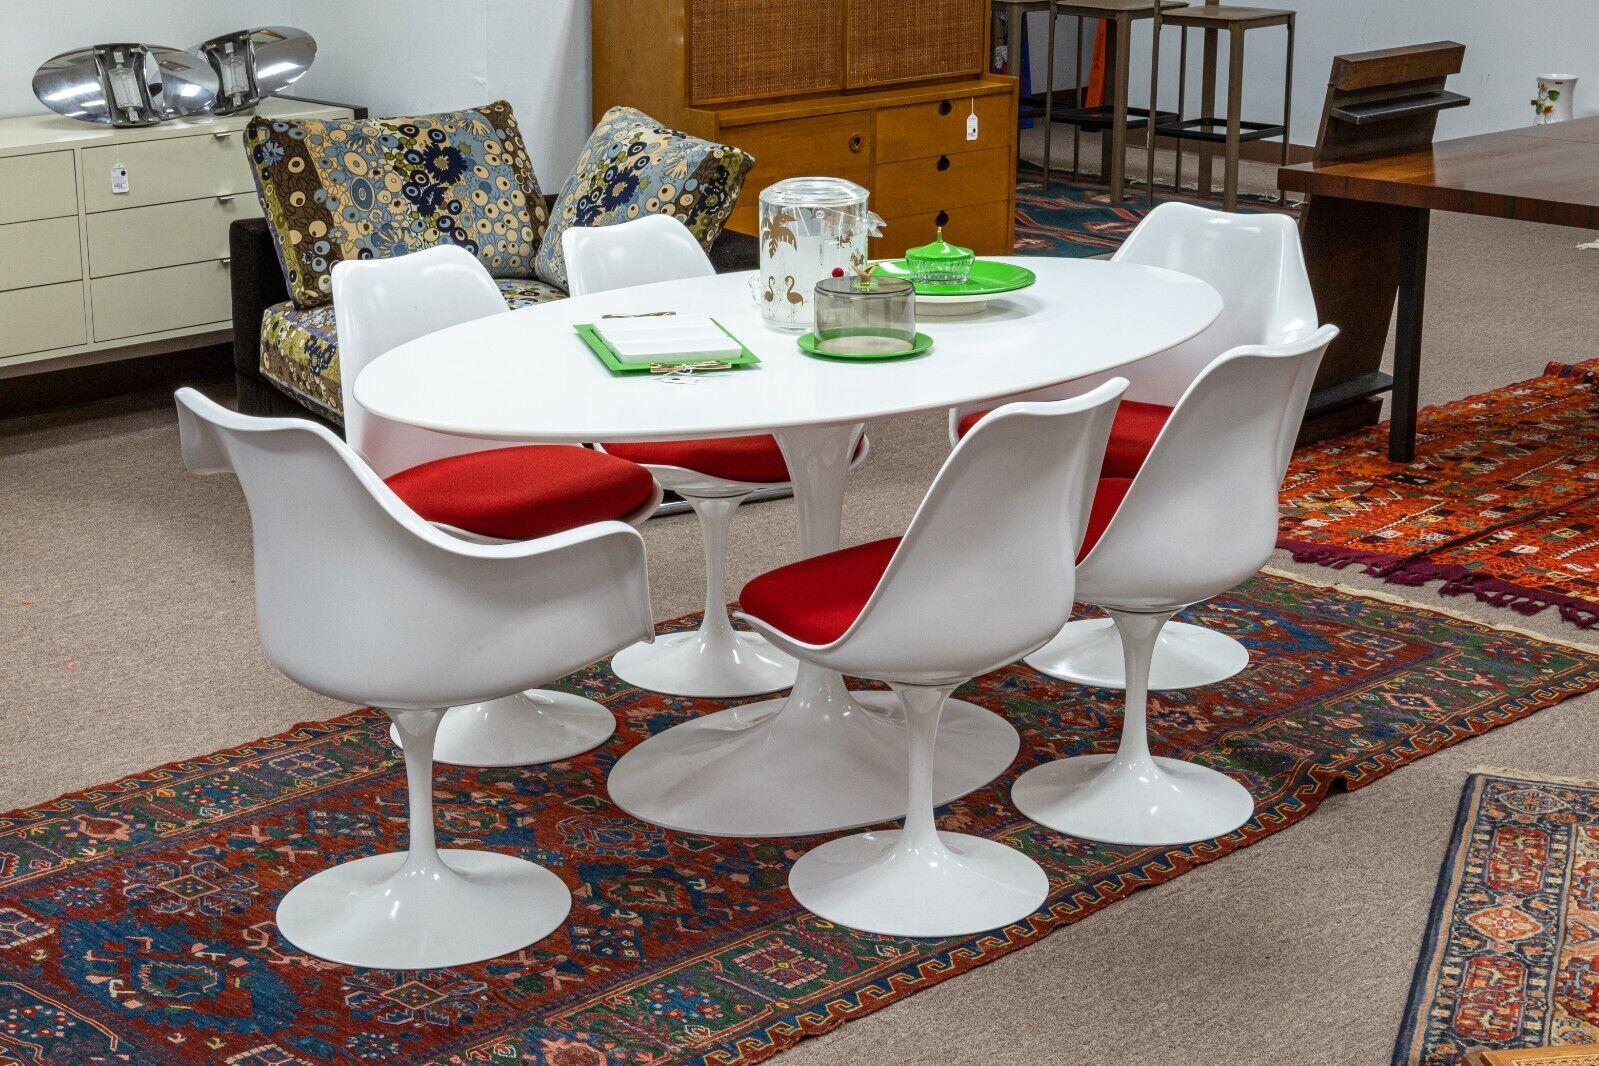 A Knoll Saarinen mid century modern white and red tulip dining set. An incredible set from legendary designer Eero Saarinen for Knoll furniture. This amazing dining set includes a large oval tulip dining table, 2 tulip arm chairs, and 4 tulip side